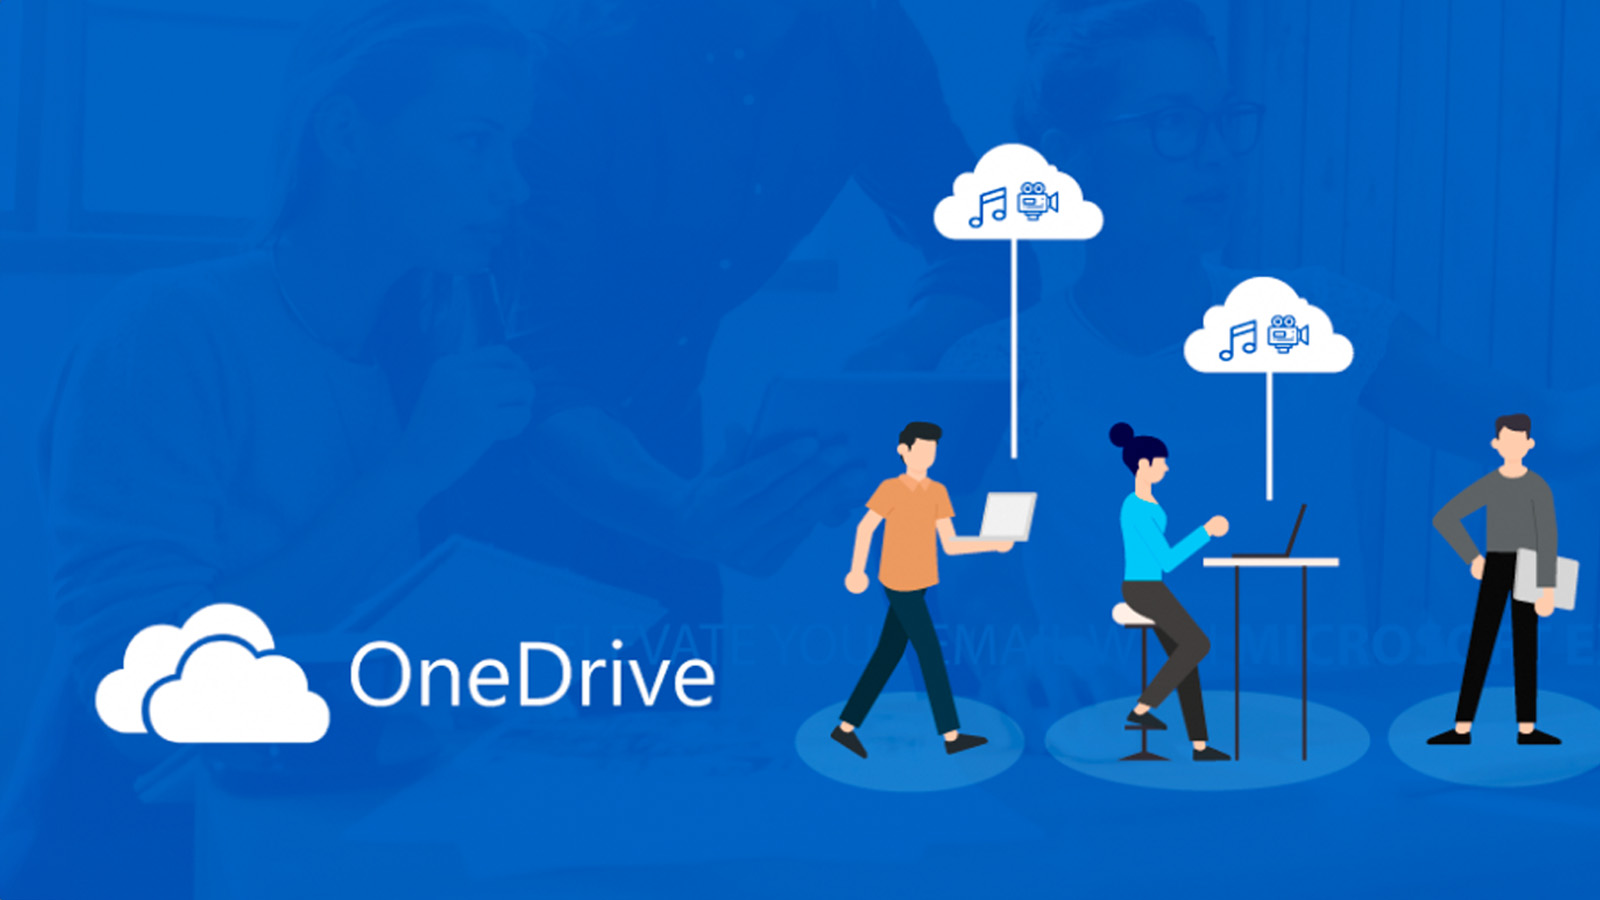 Why OneDrive is right for your business